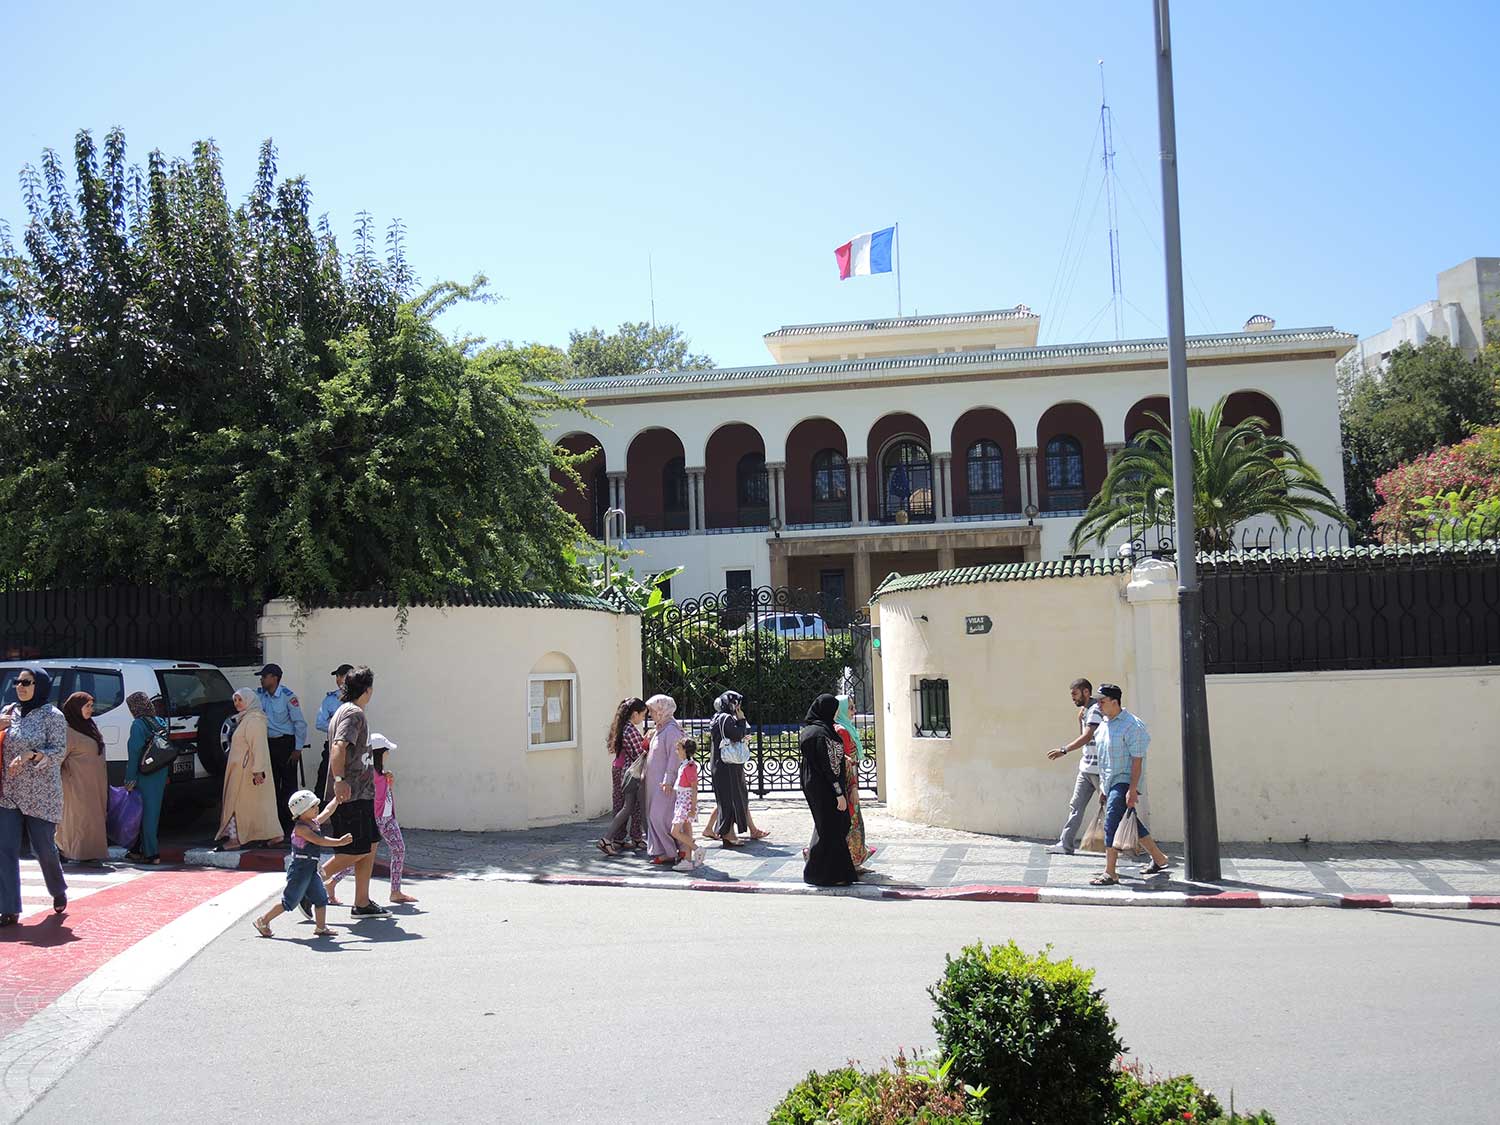 Exterior view of the facade of the French Consulate from across the street